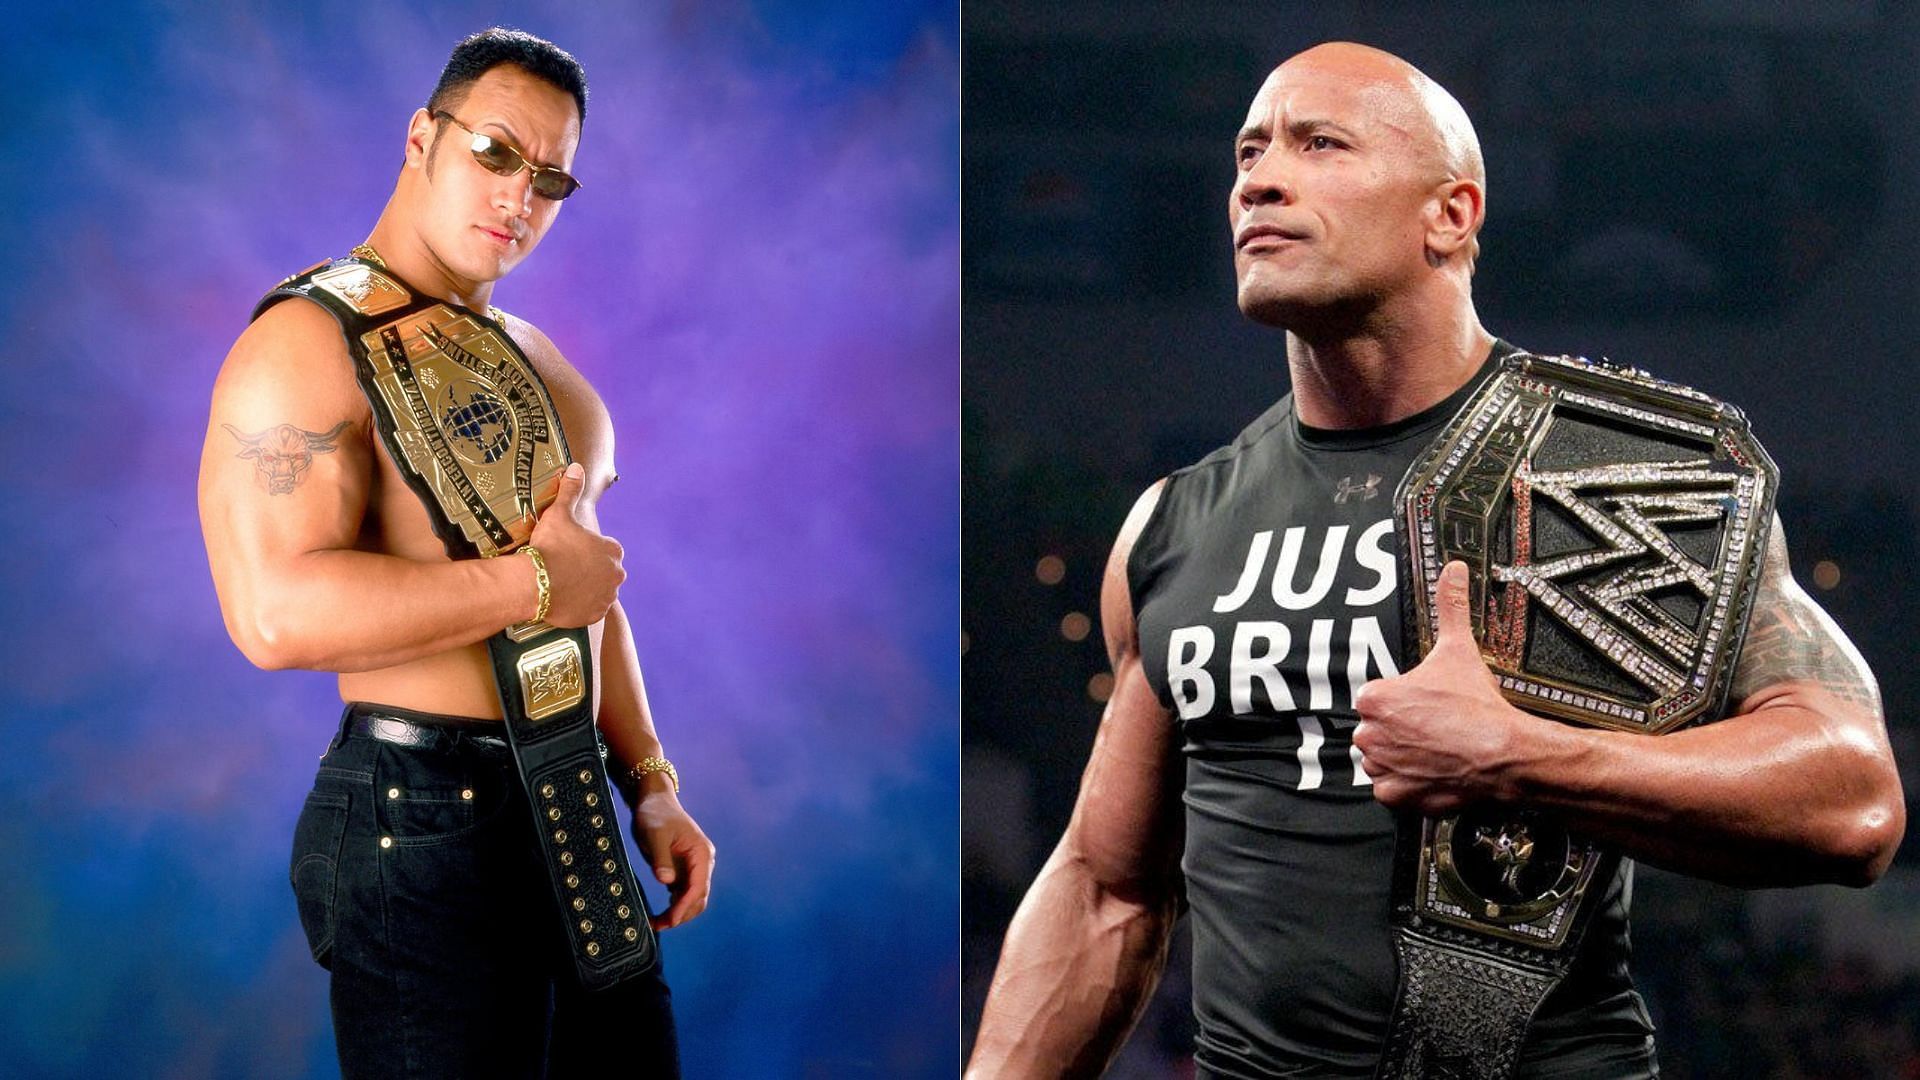 WWE legend The Rock is now a Hollywood movie star